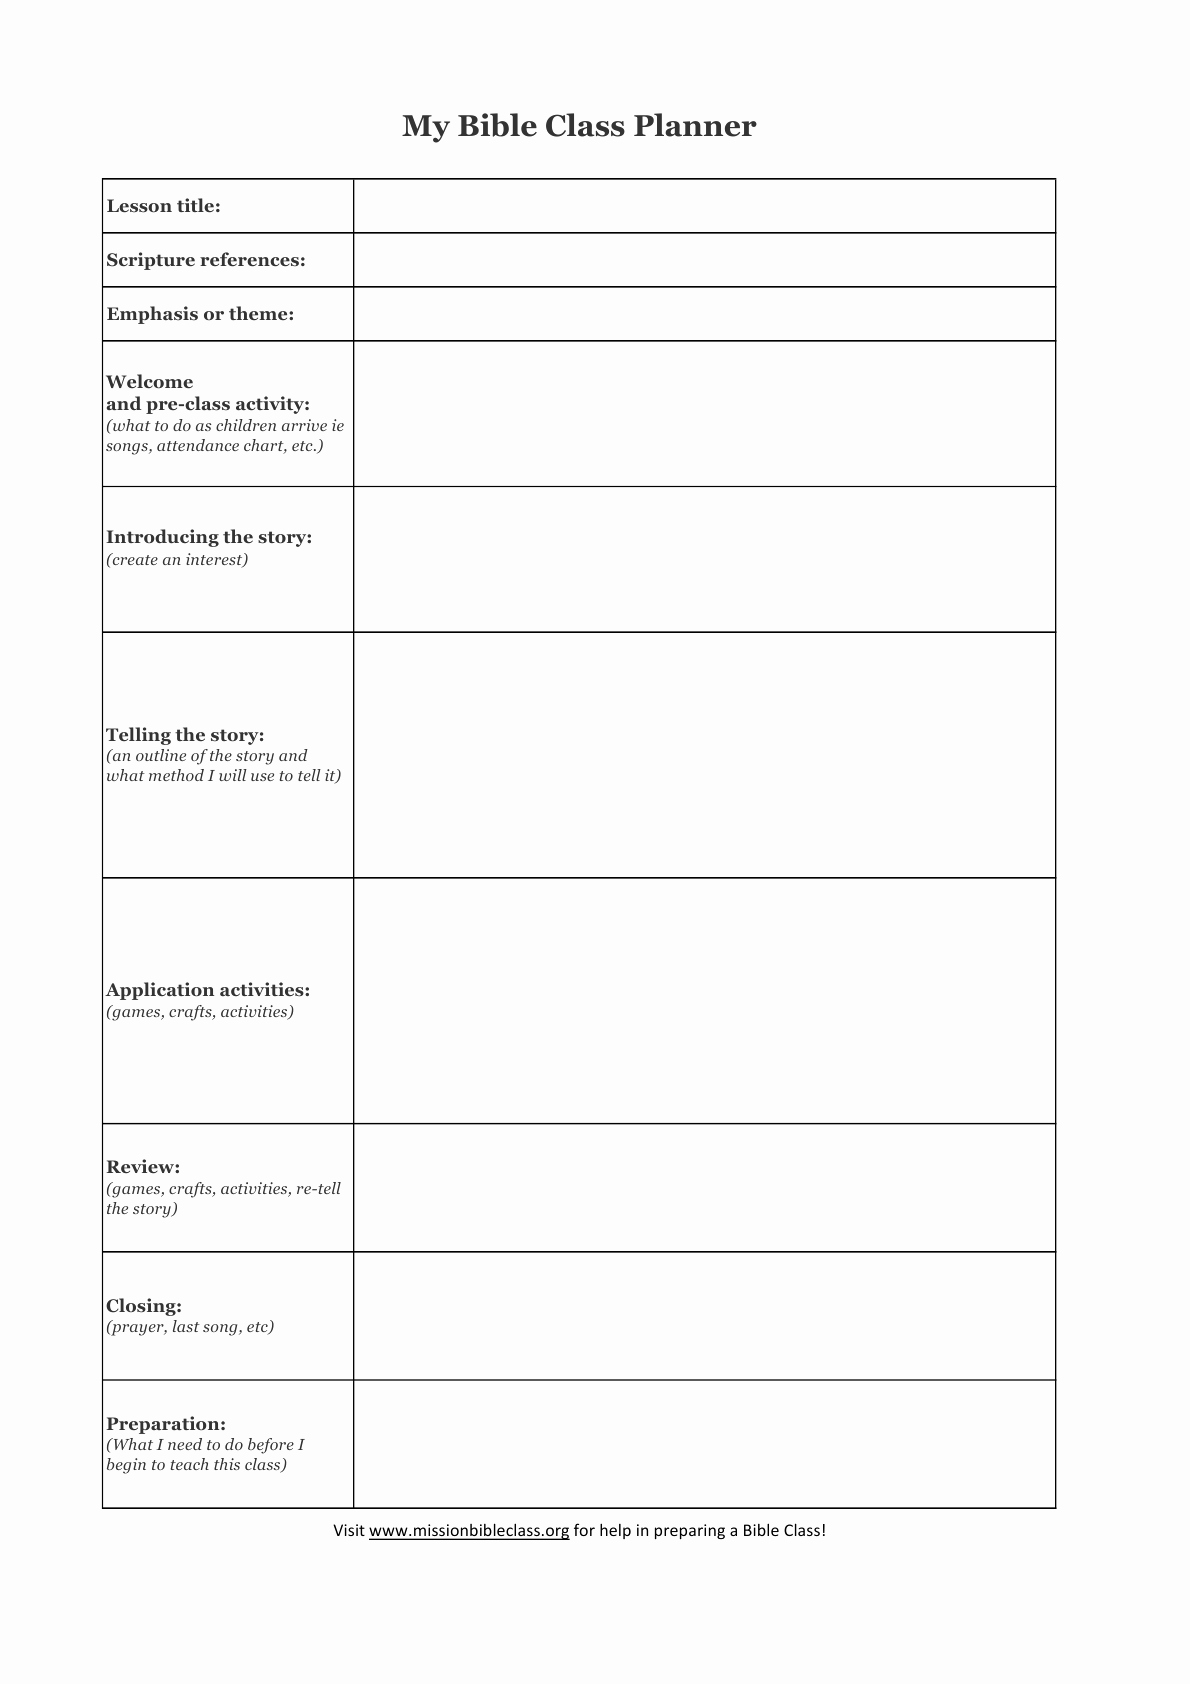 Sunday School Schedule Template Elegant Blank Lesson Plan Templates to Print